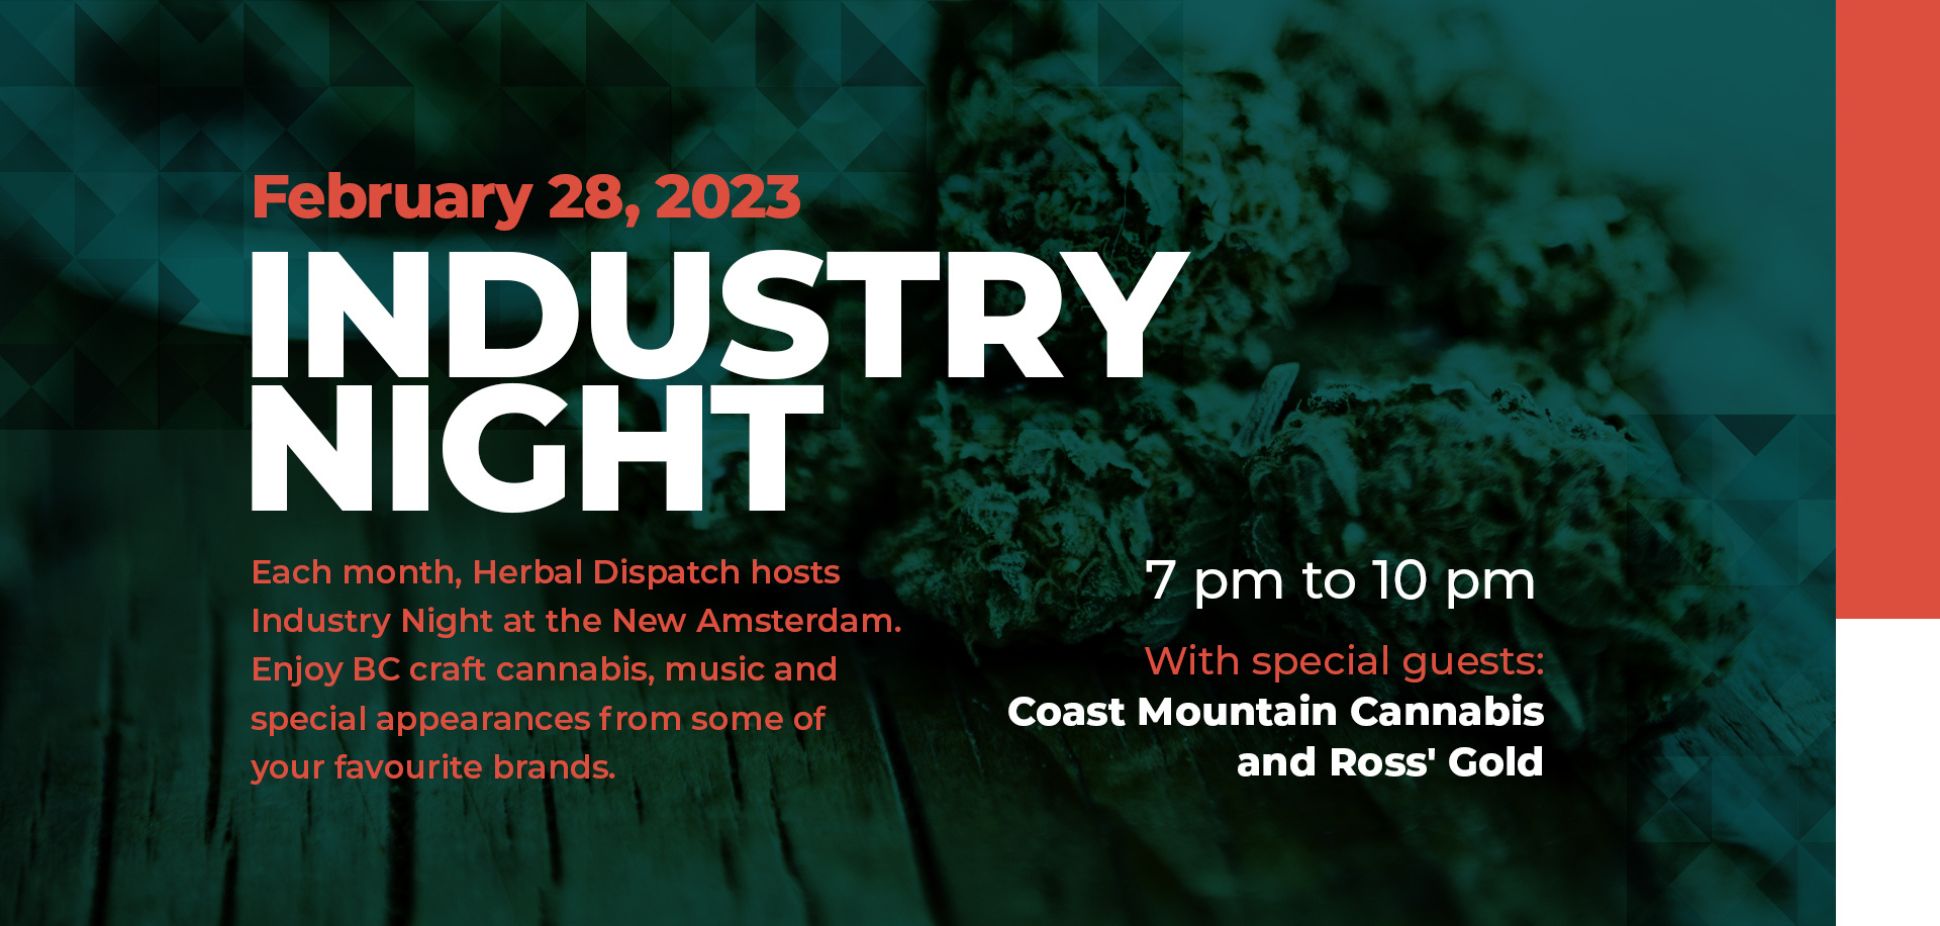 Industry Night Brought to You by Herbal Dispatch